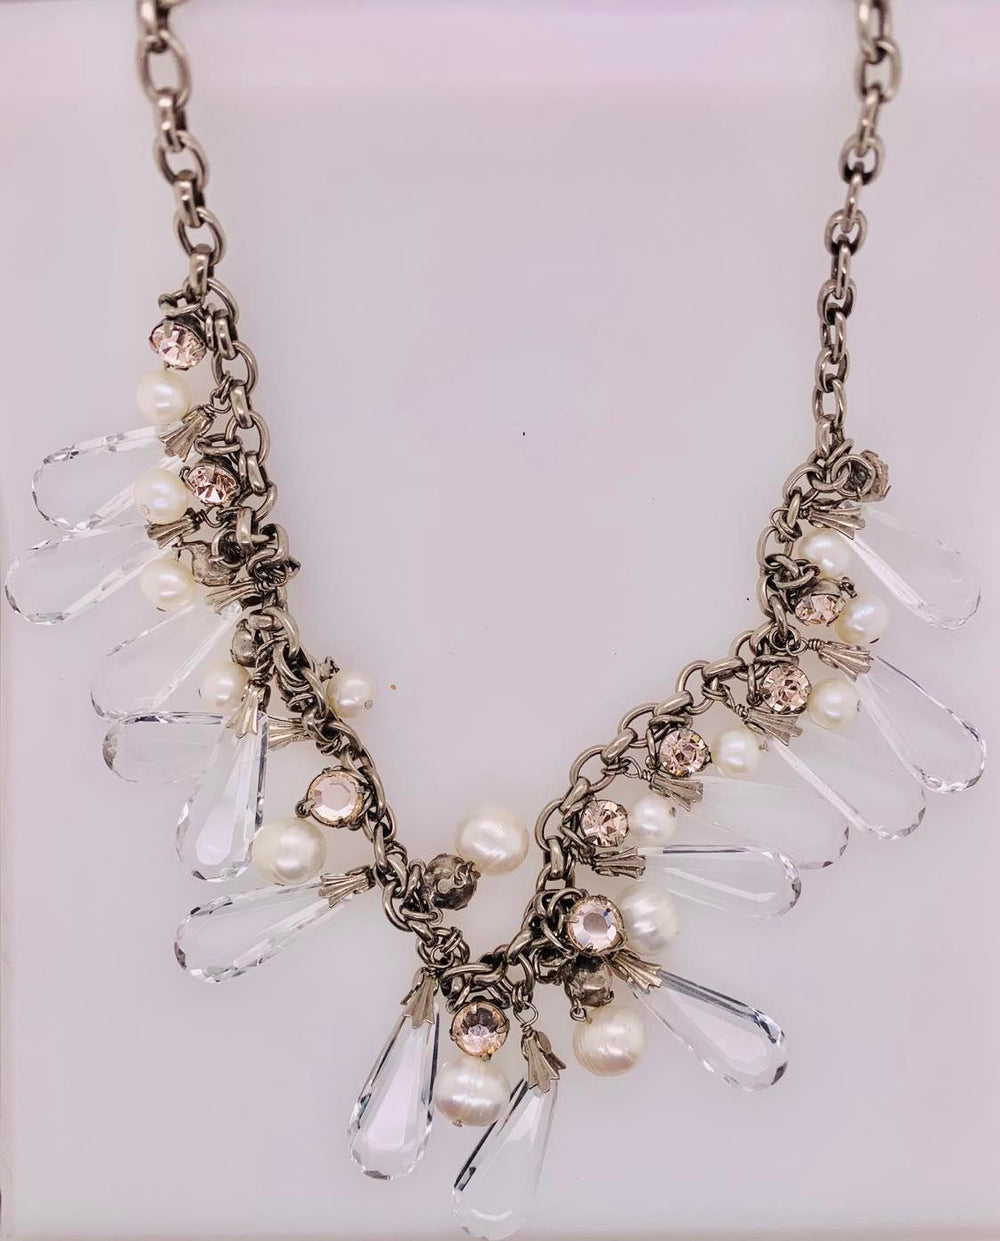 Elaborate Teardrop and Beaded Crystal Necklace